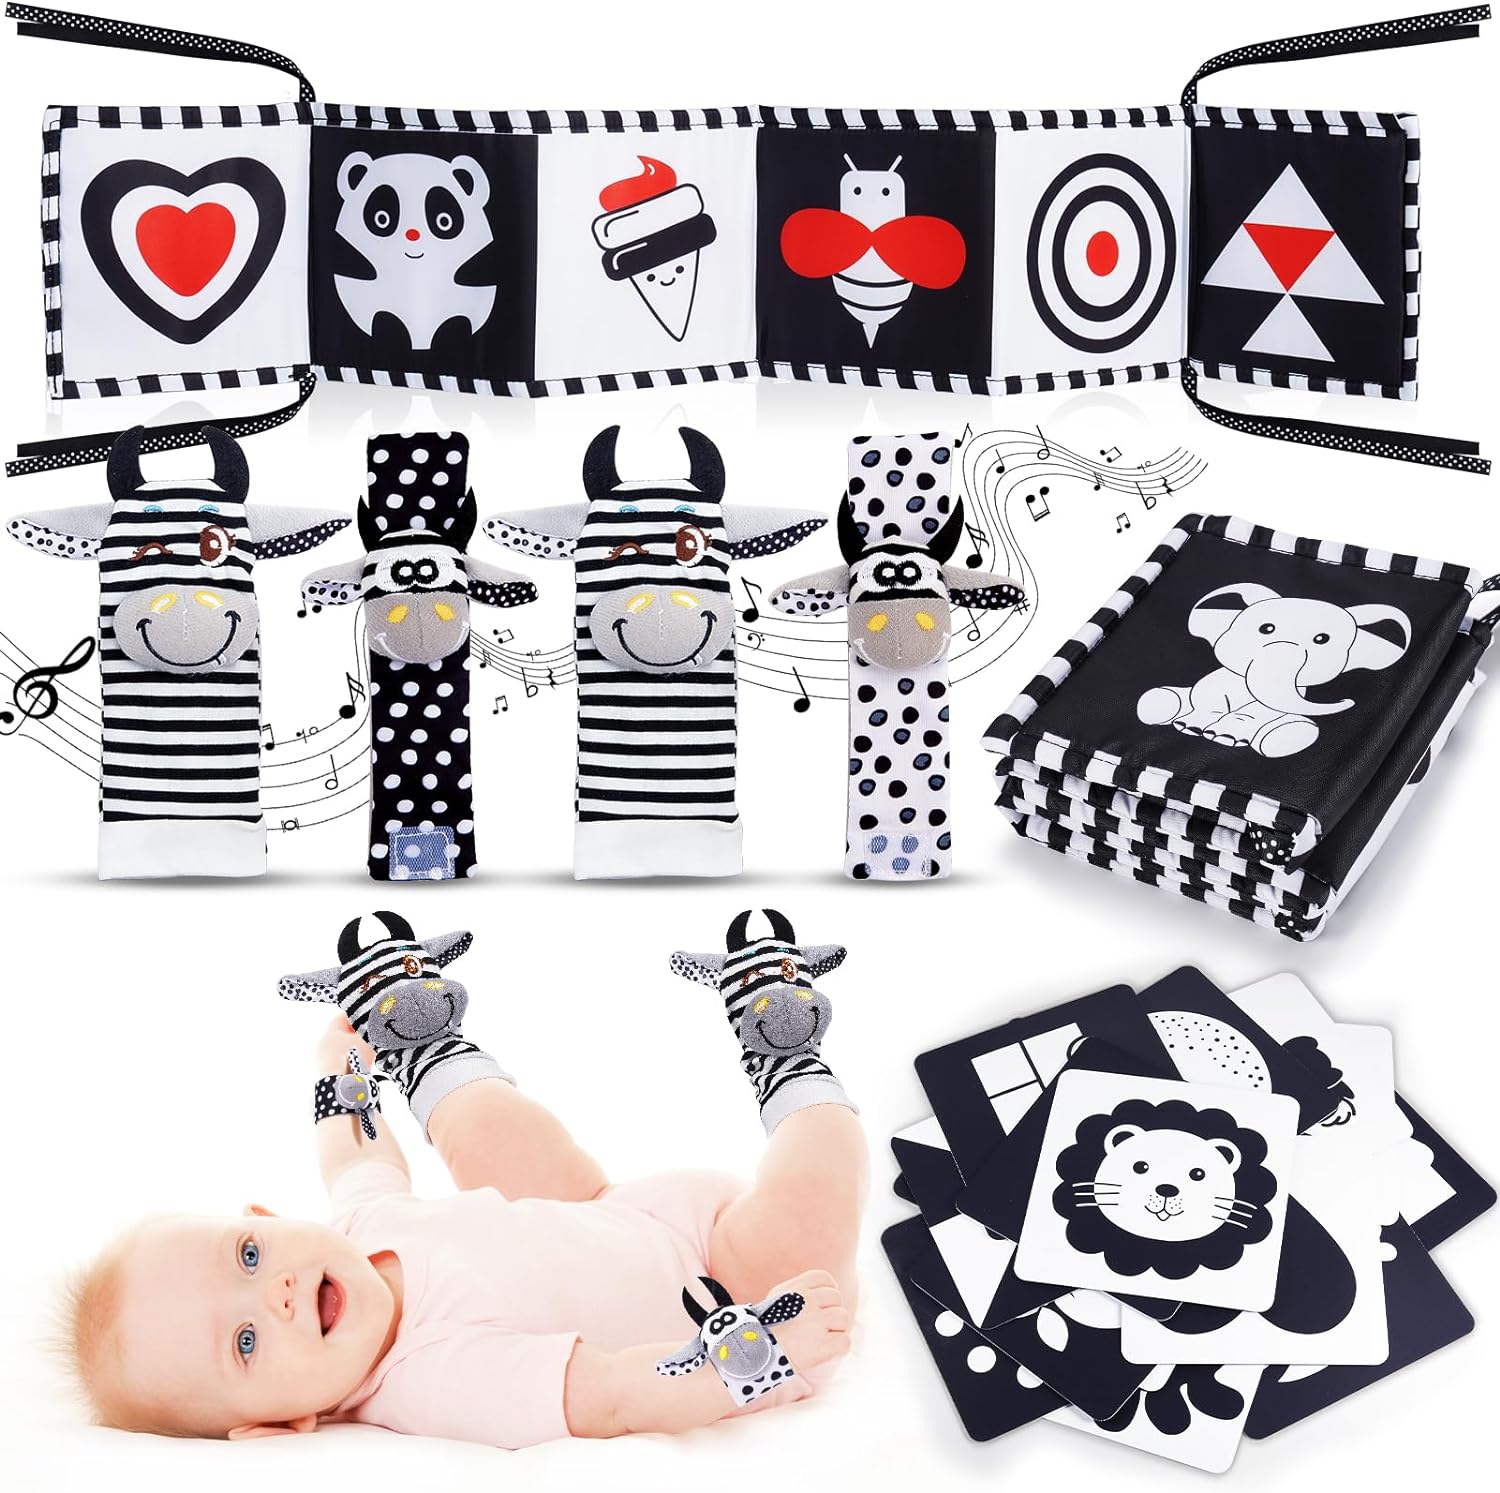 HappyKidsClub Black and White Sensory Toys, Baby Essentials for Newborn Sensory Toys for Babies Baby Toys 0-6 Months Baby Gifts Baby Rattle Socks Toys for Newborns Baby Sensory Toys 0 6 Months